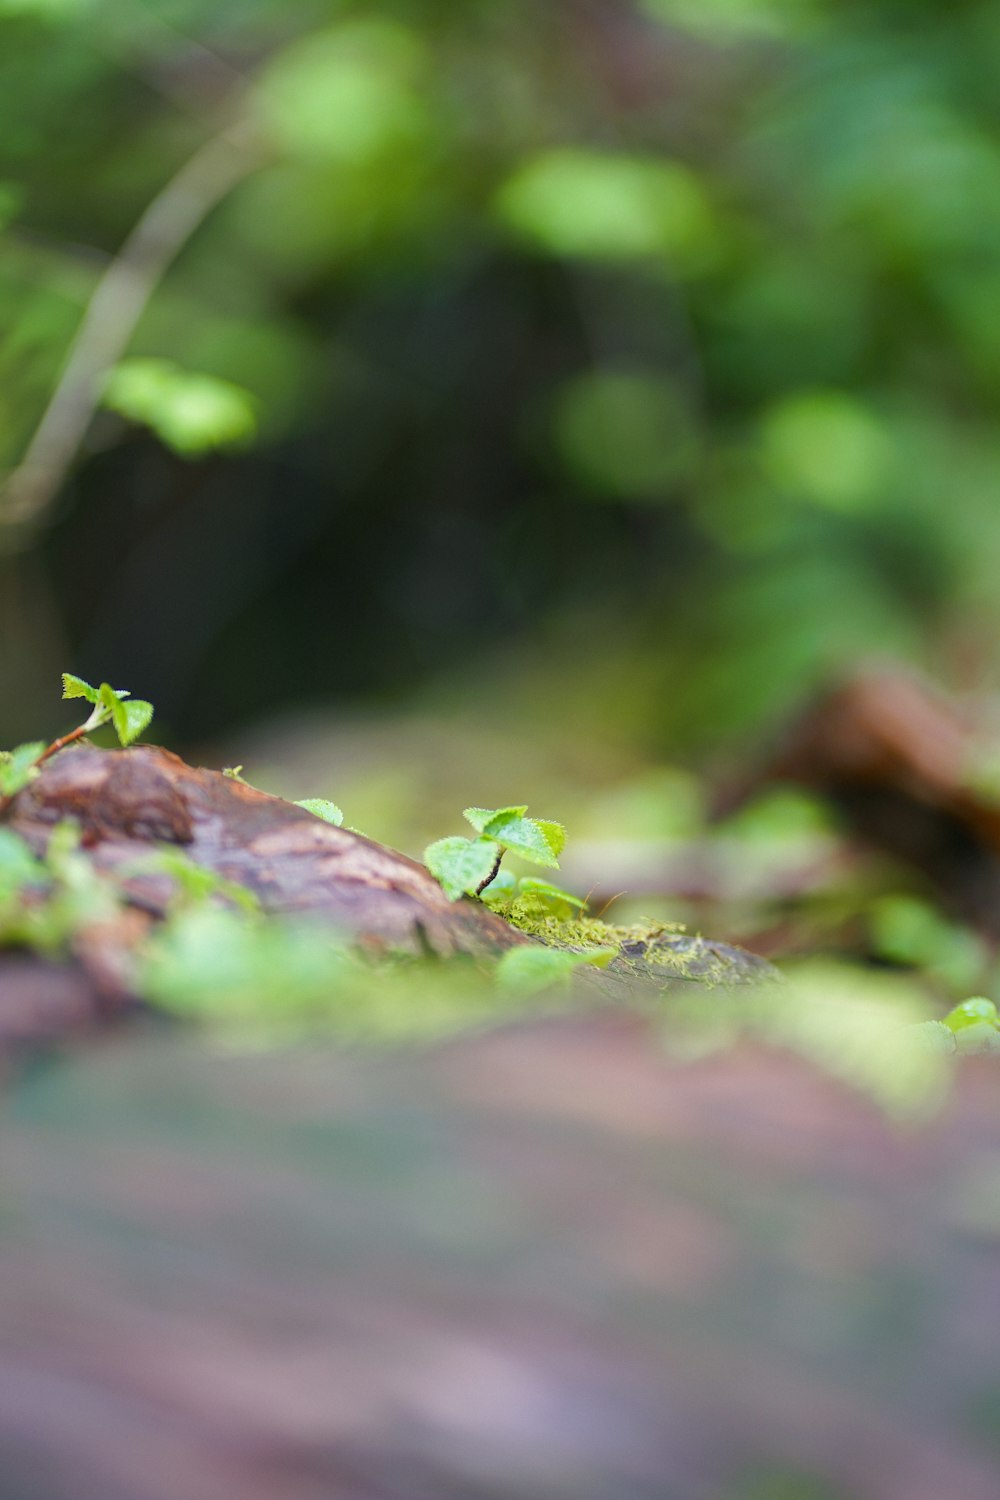 a close up of a green plant growing on a rock